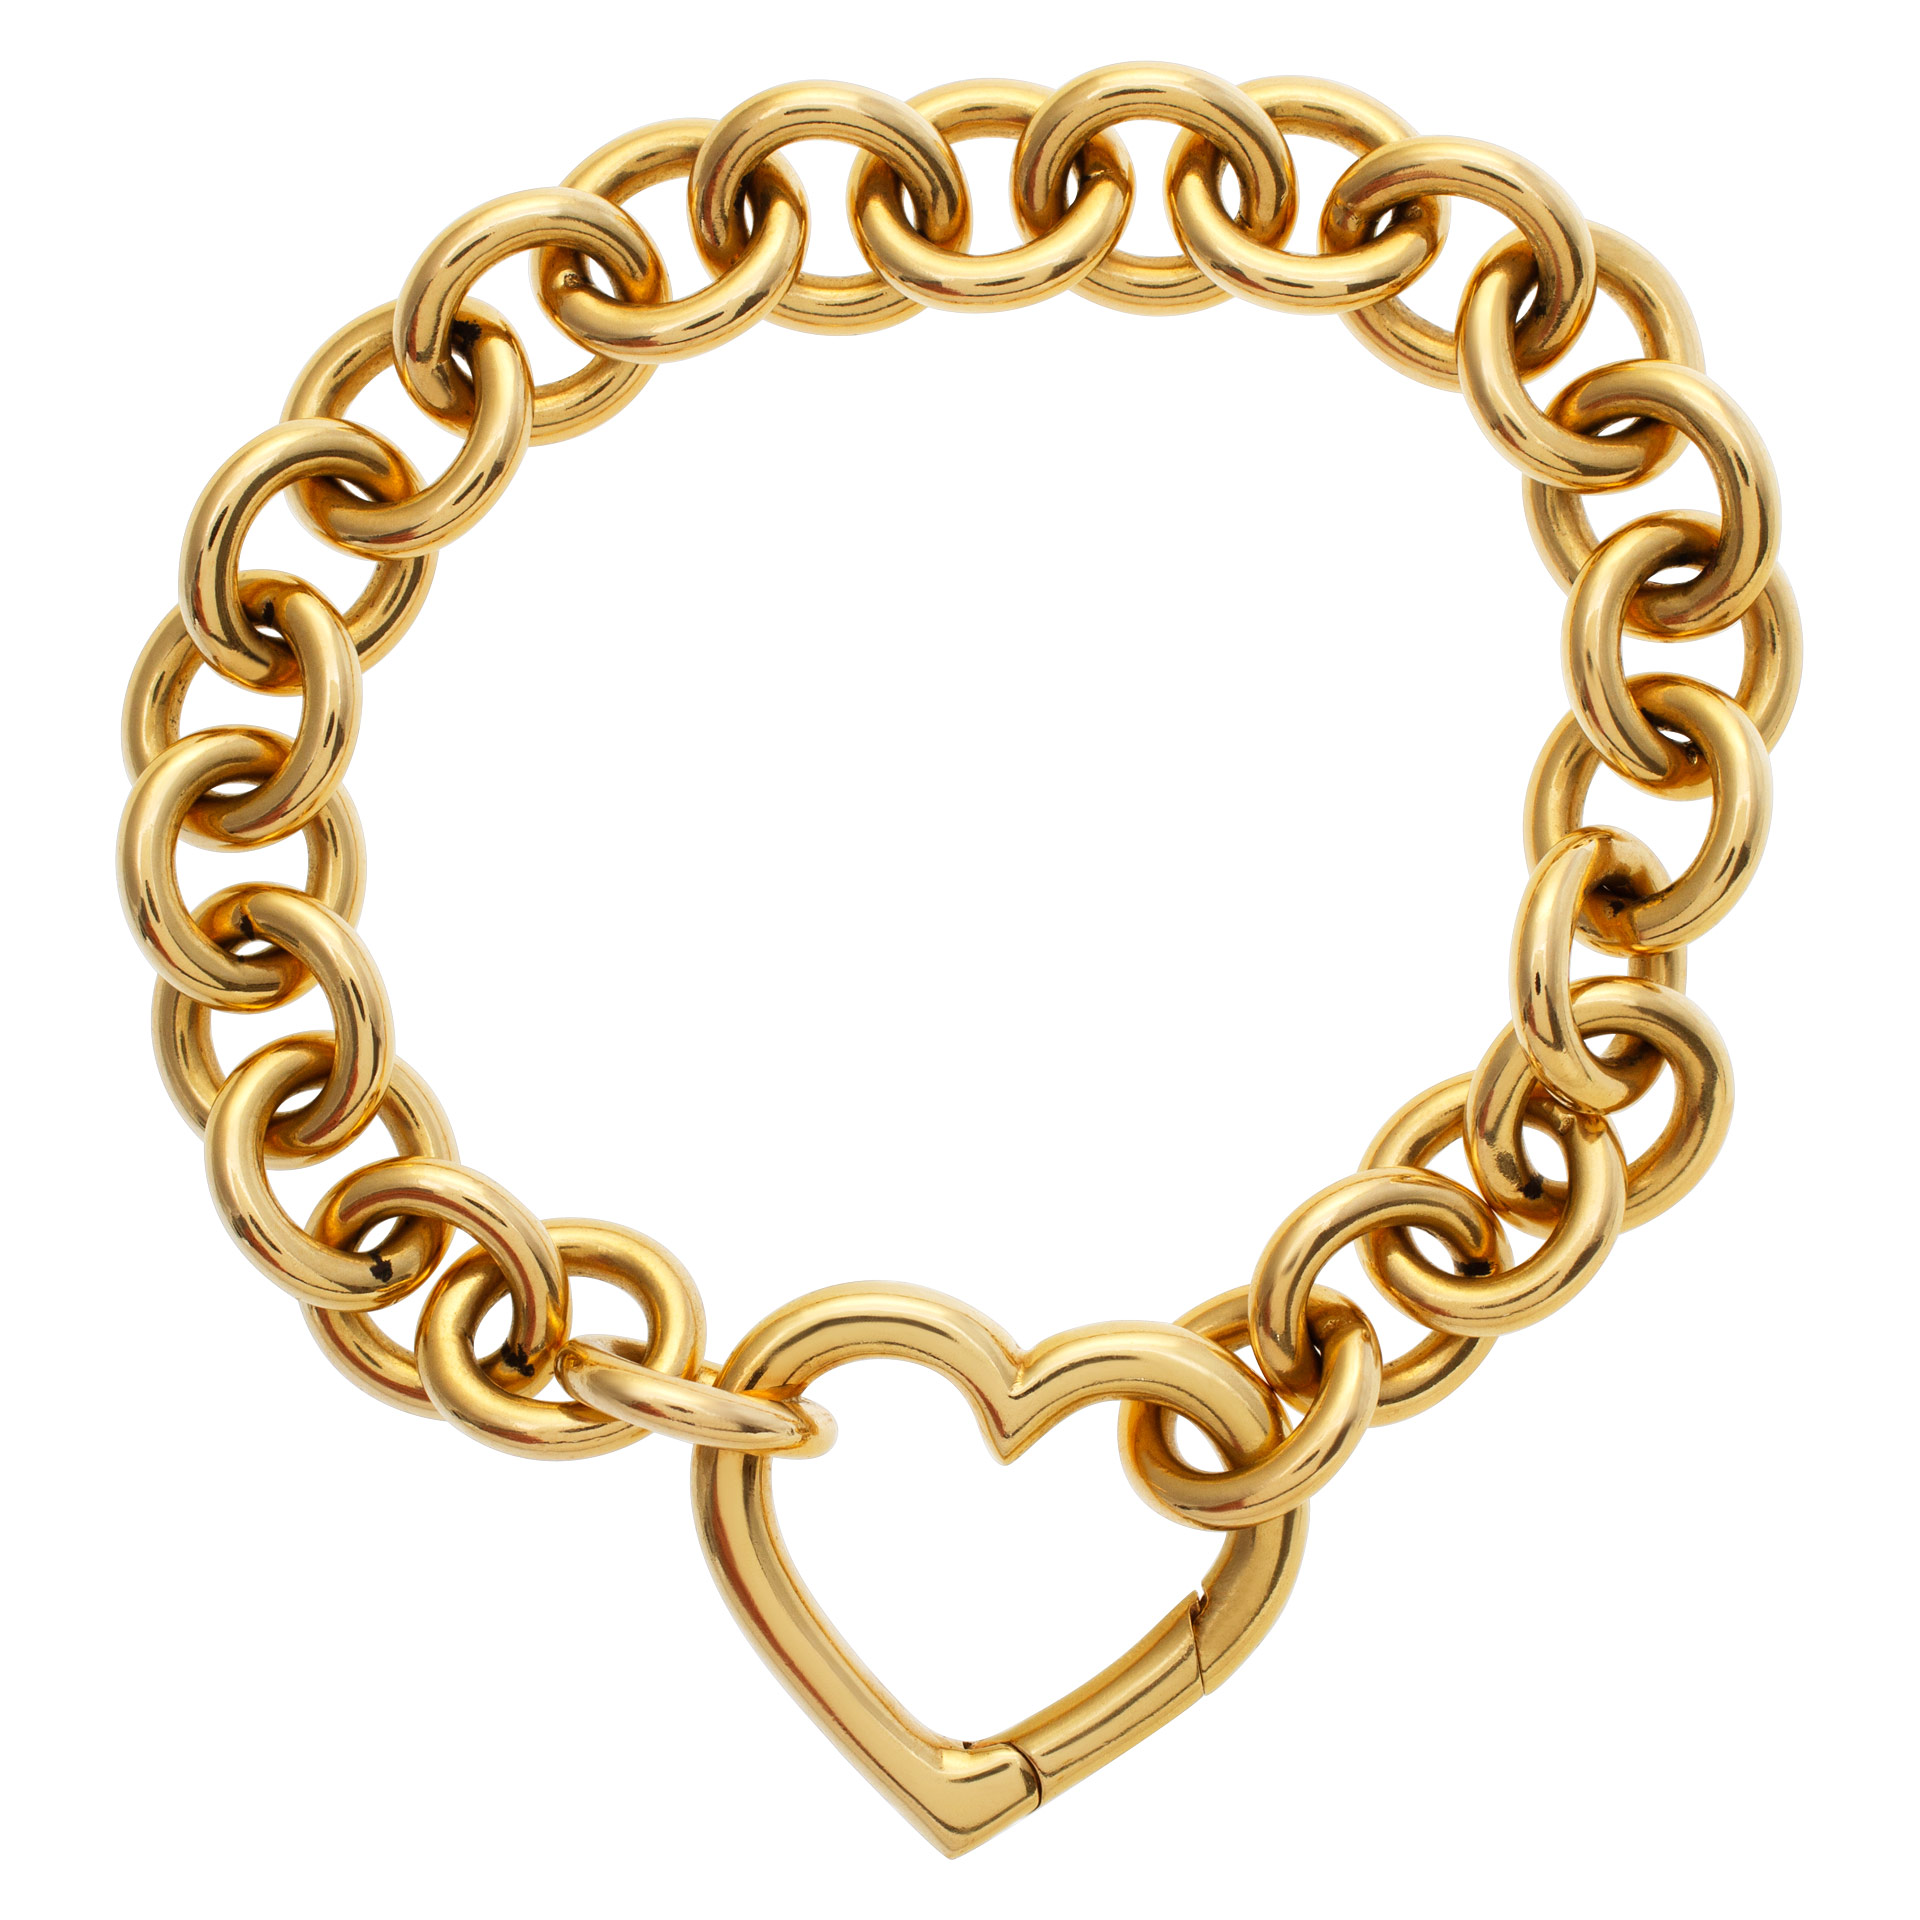 Tiffany and Co. 18k link bracelet with a heart clasp